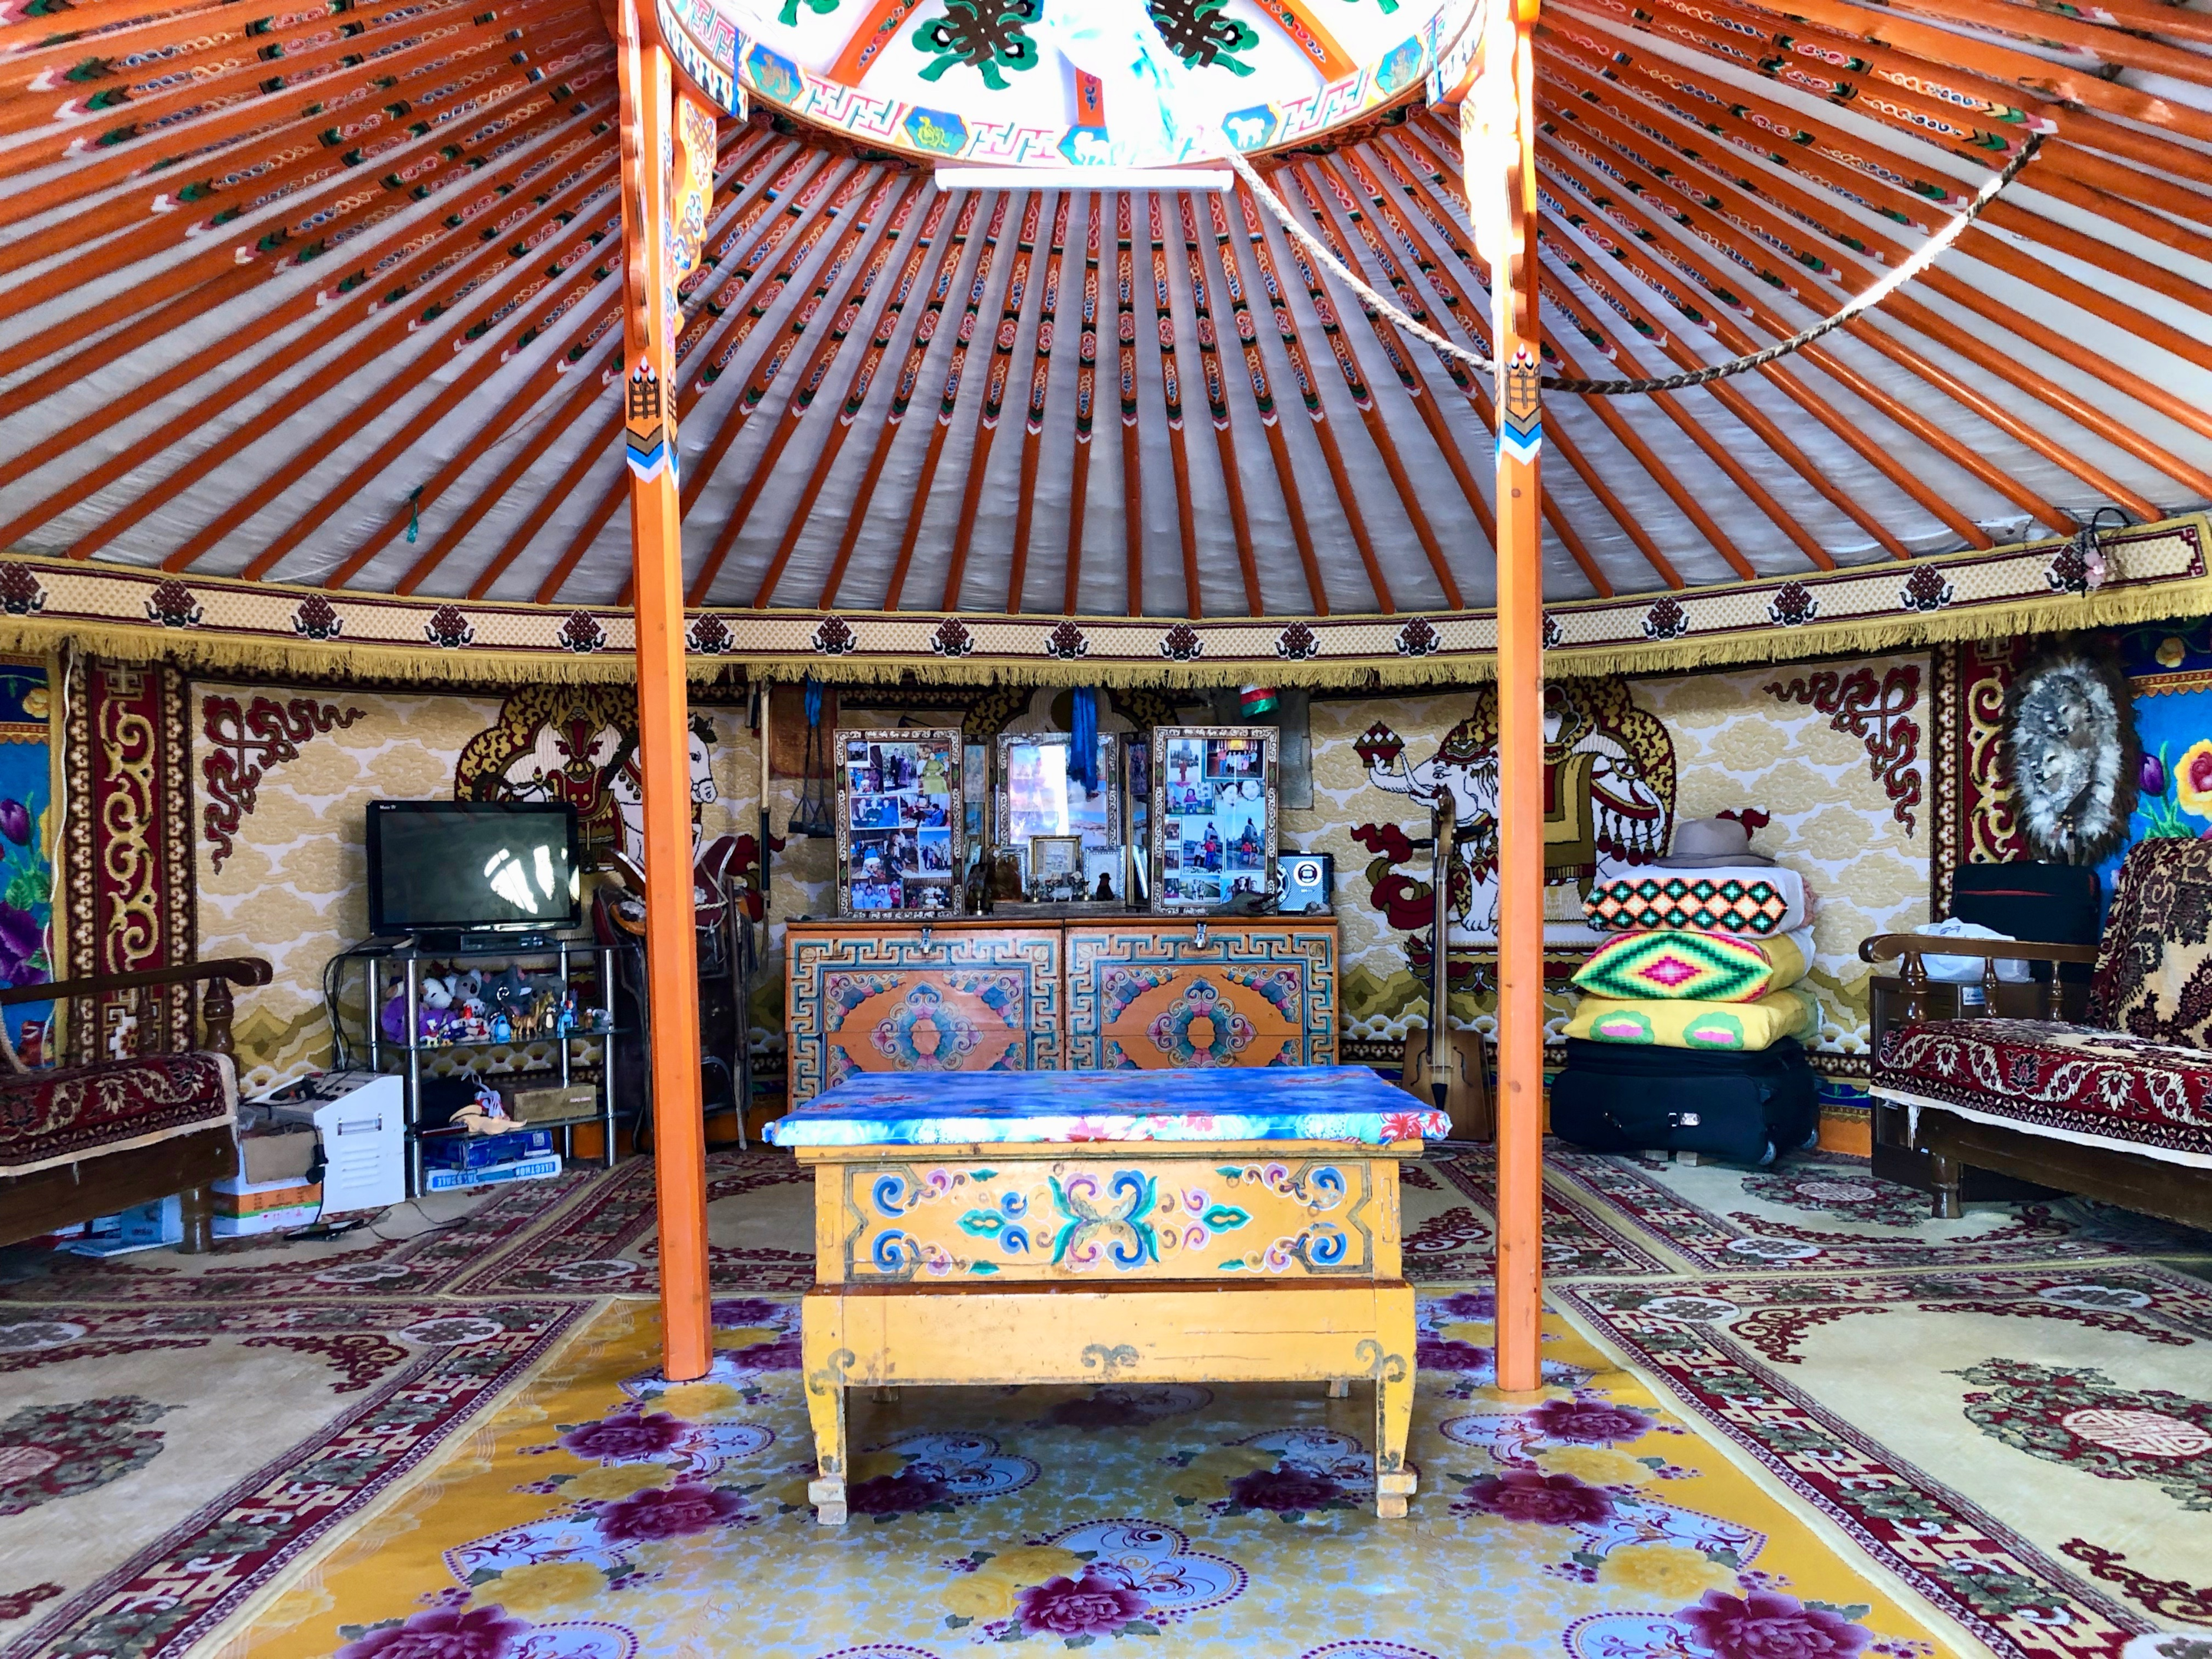 Visiting the yurt of a nomadi family and staying there for a night is a great way to learn about the culture